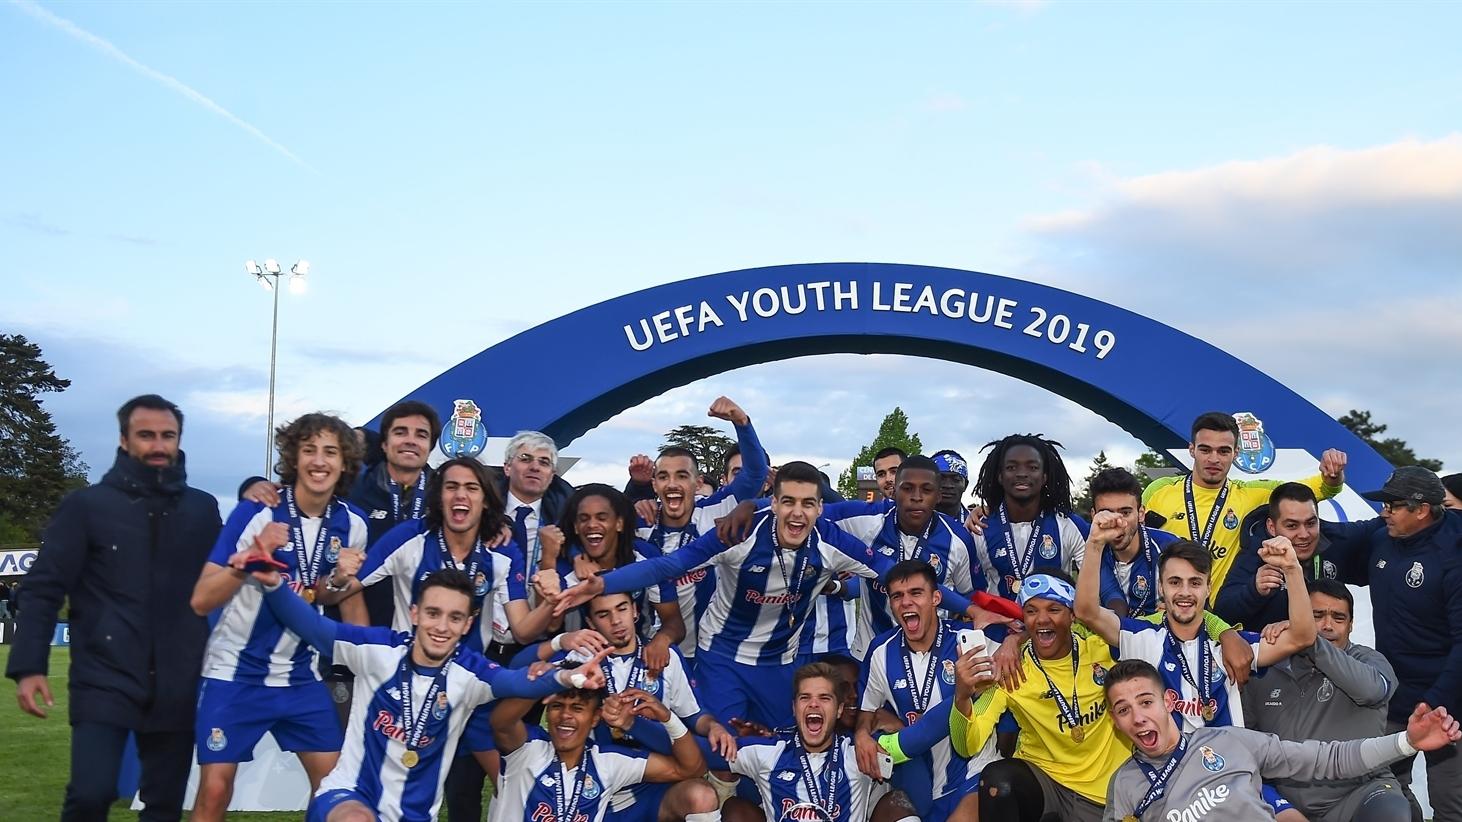 Youth League finals in Nyon: all you 